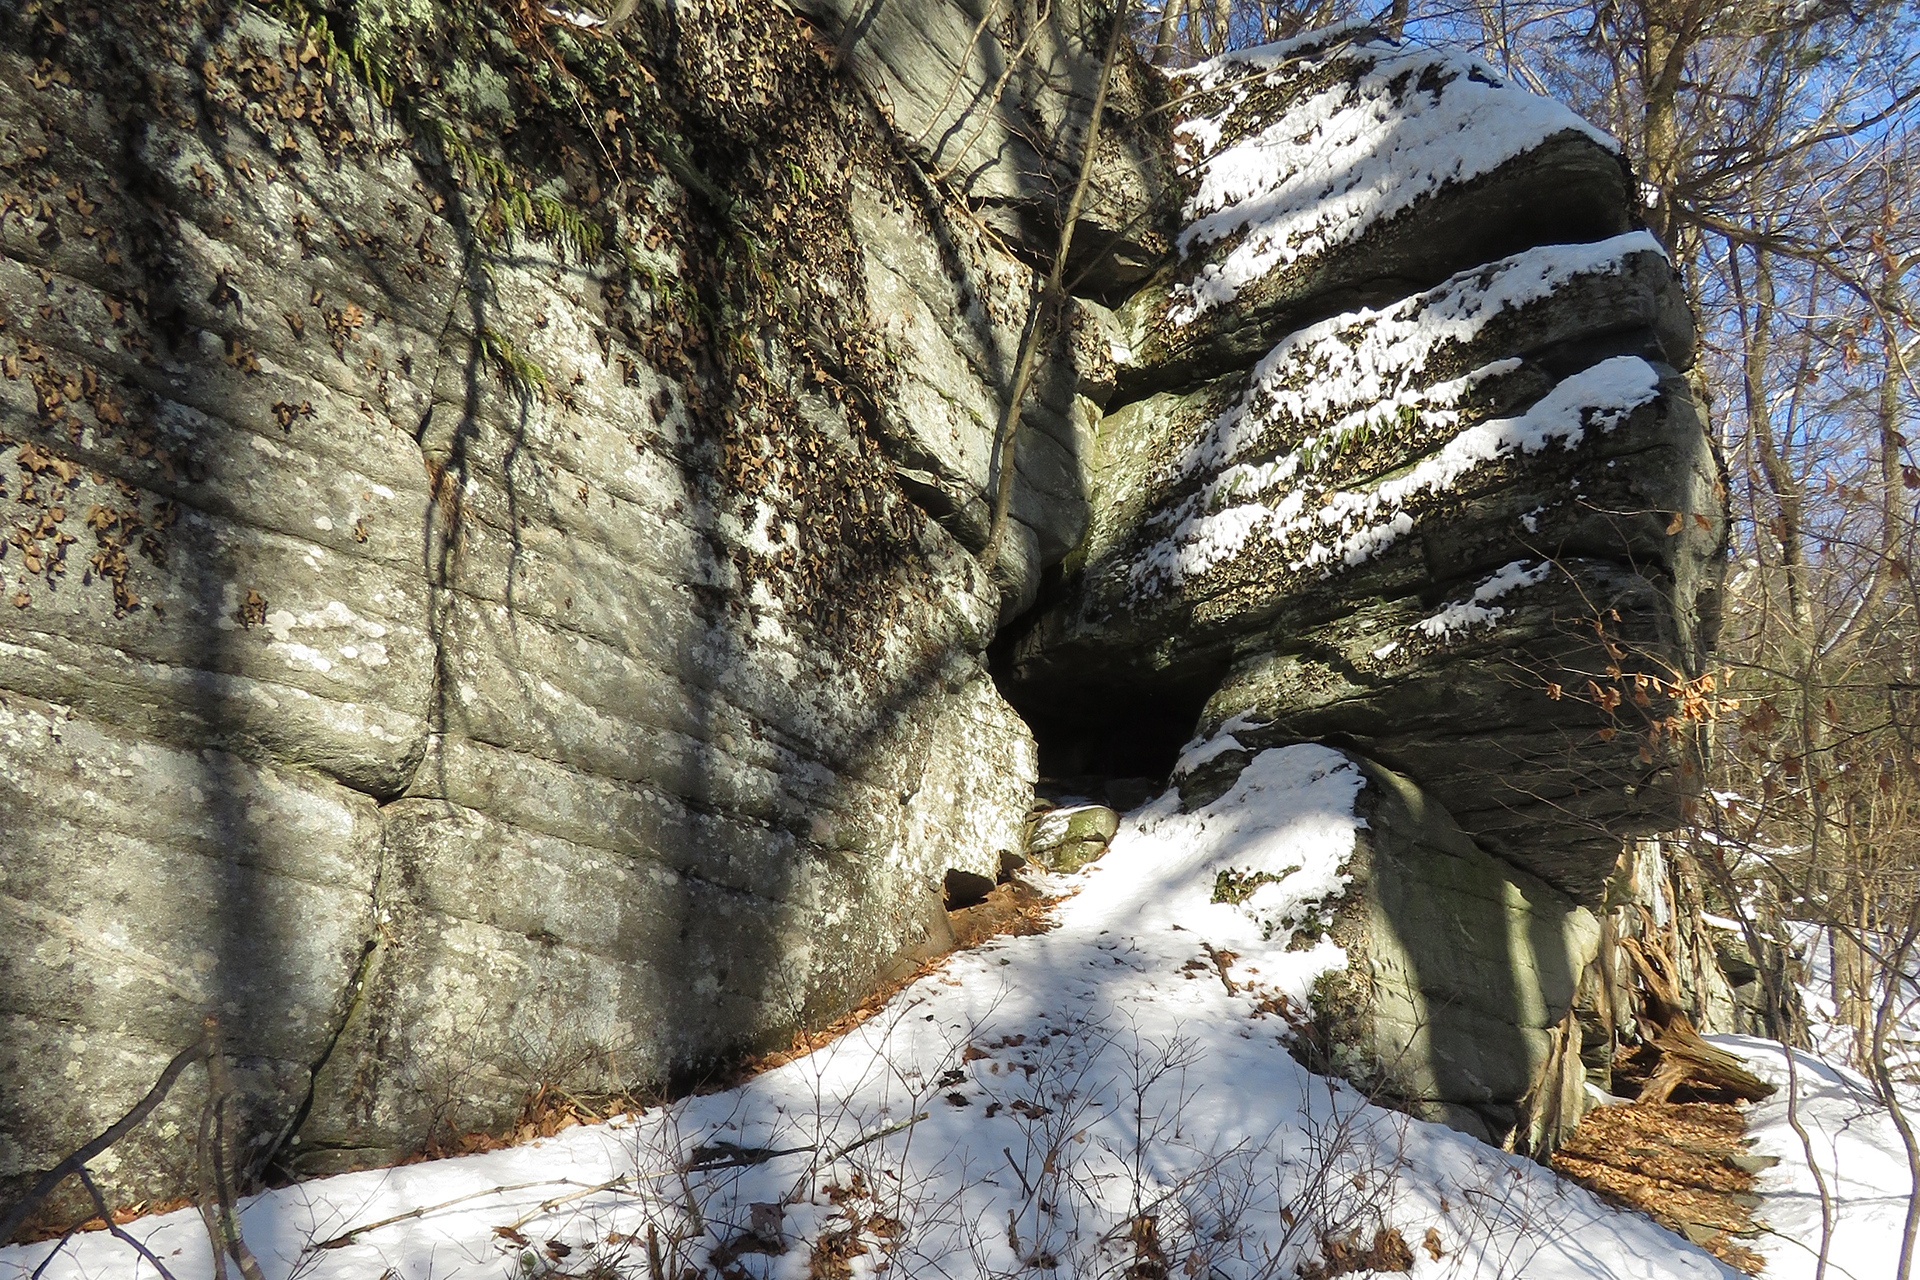 Small, cave-like hole in a rock formation, covered in sparse snow